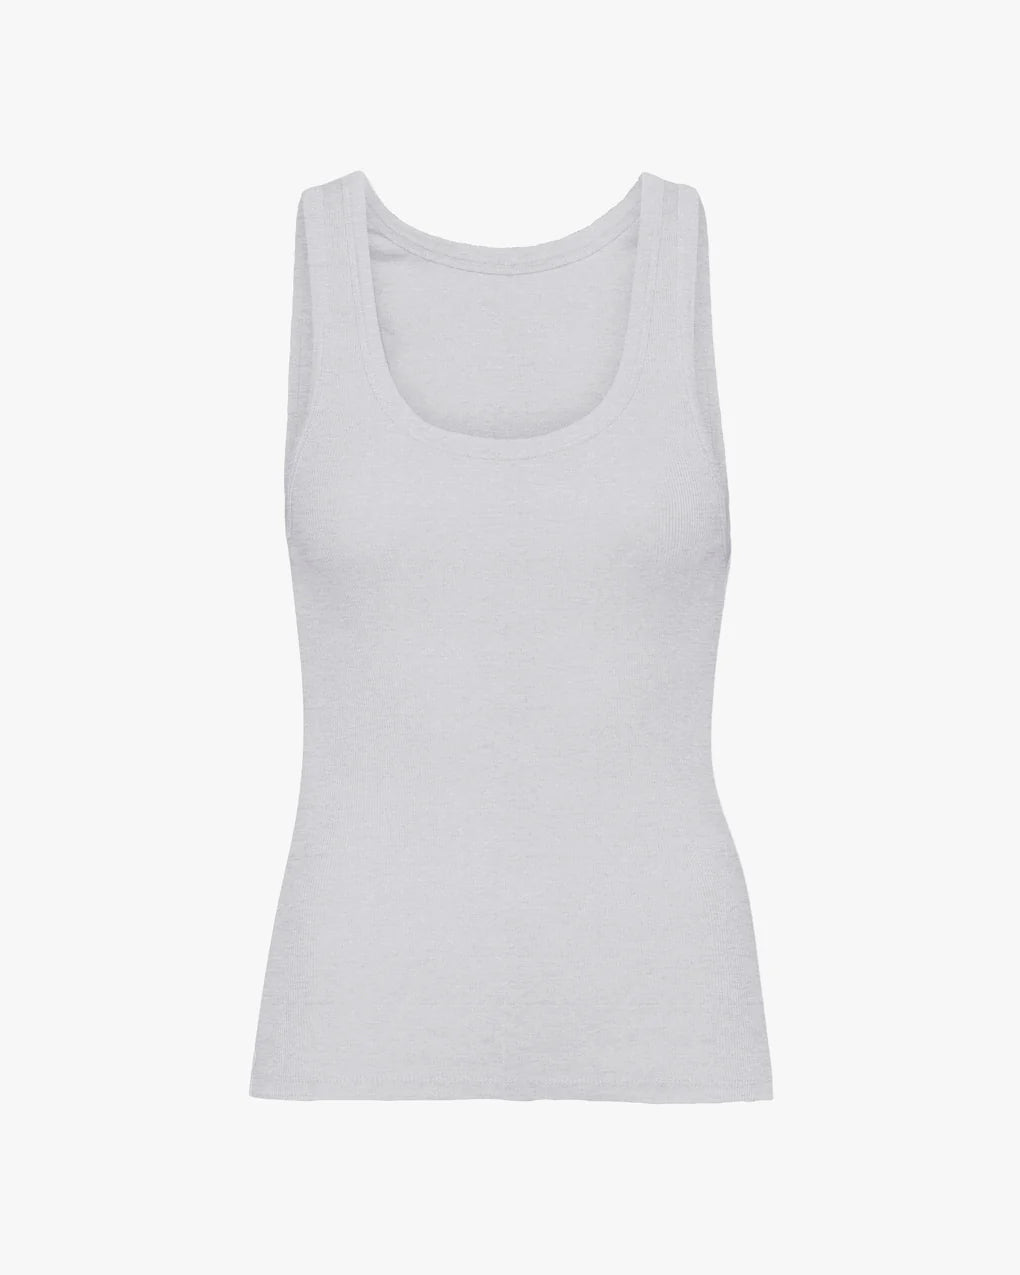 A snug and stretchy Colorful Standard Organic Rib Tank Top on a white background.